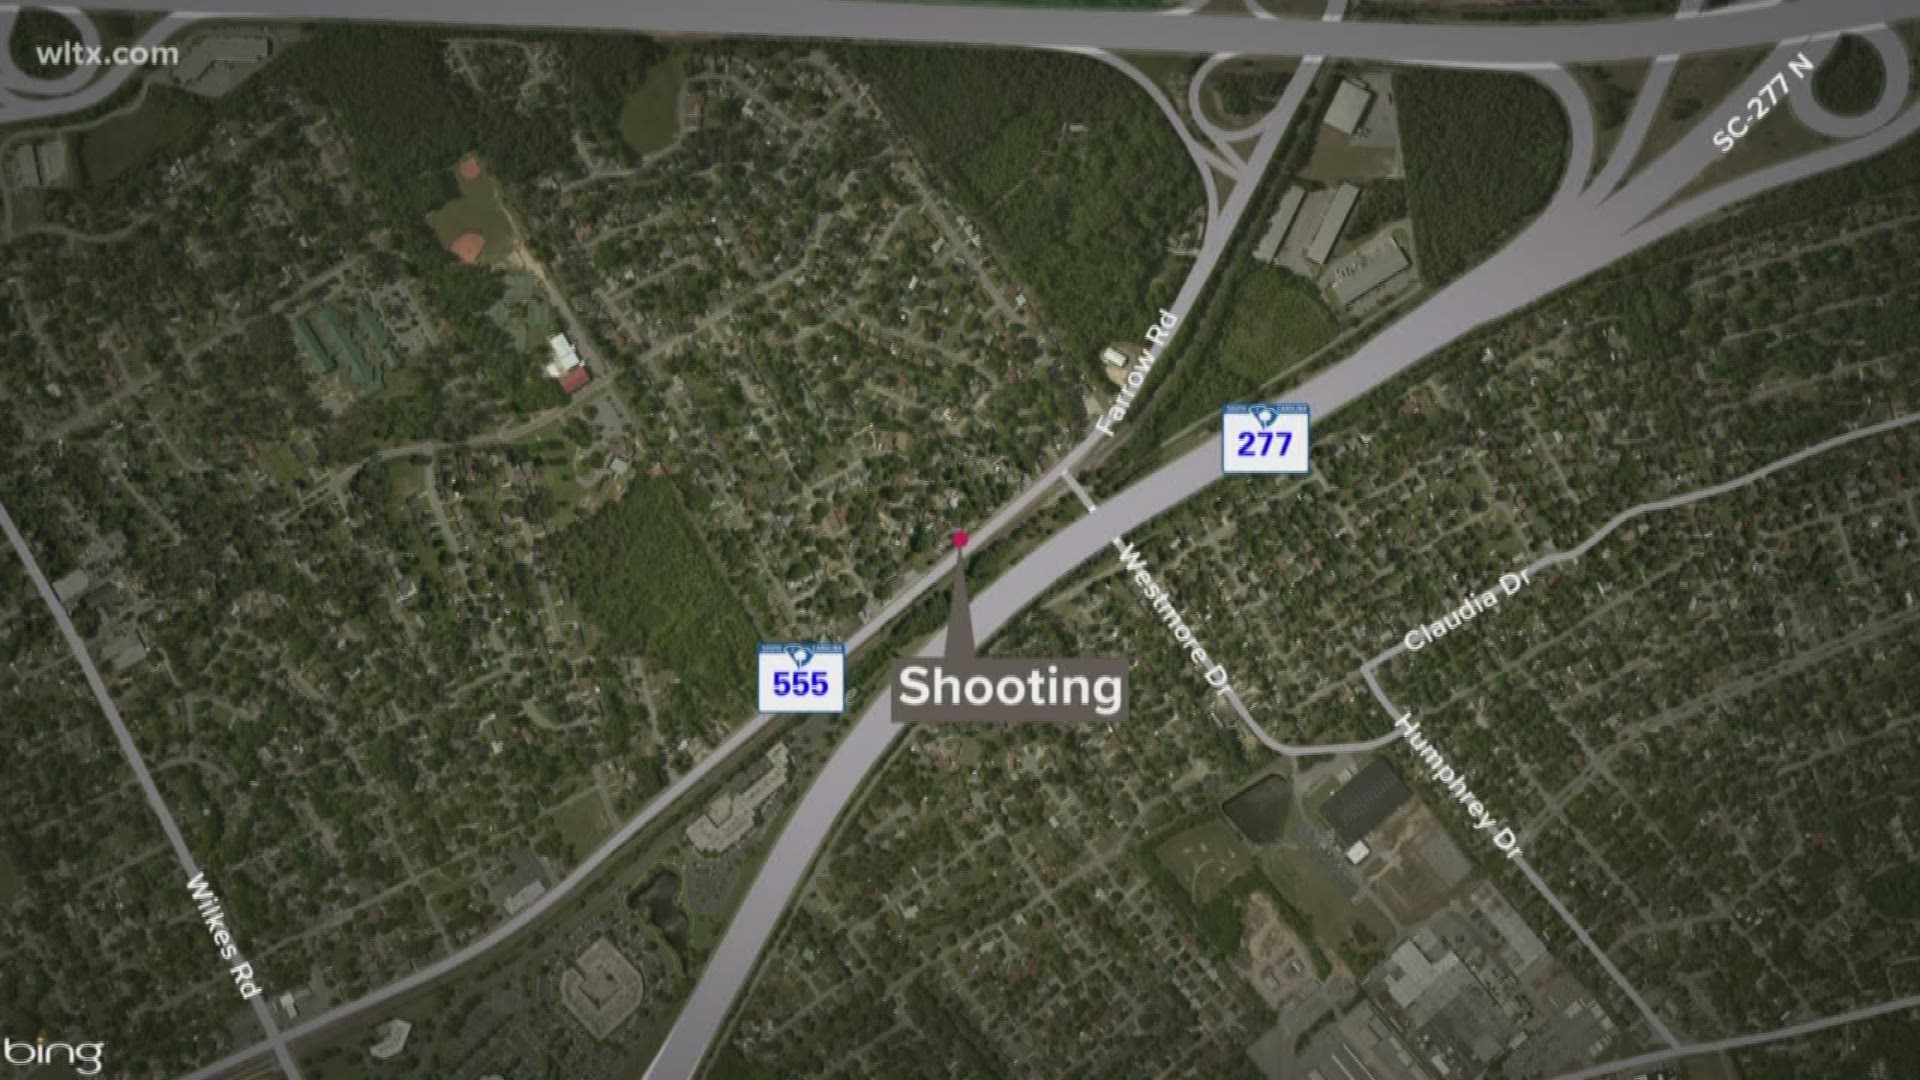 According to officials, the shooting happened Friday morning around midnight. A man was shot in the lower torso and suffered non-life threatening injuries.